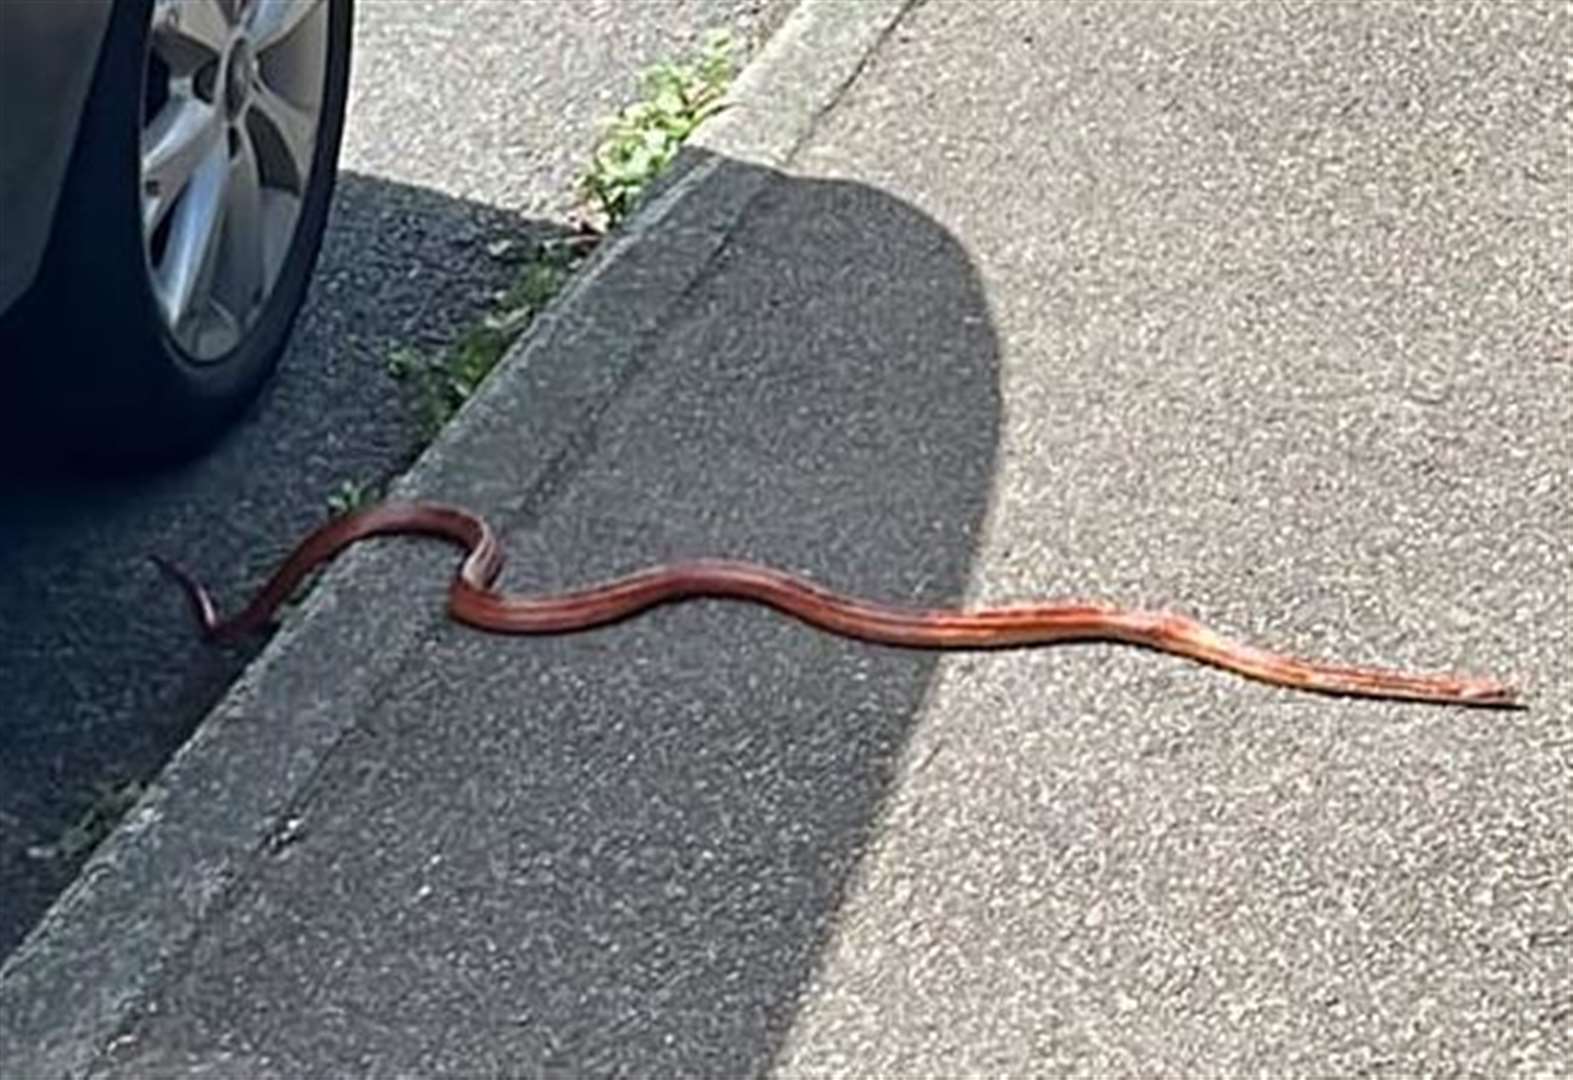 Snake on the loose in street